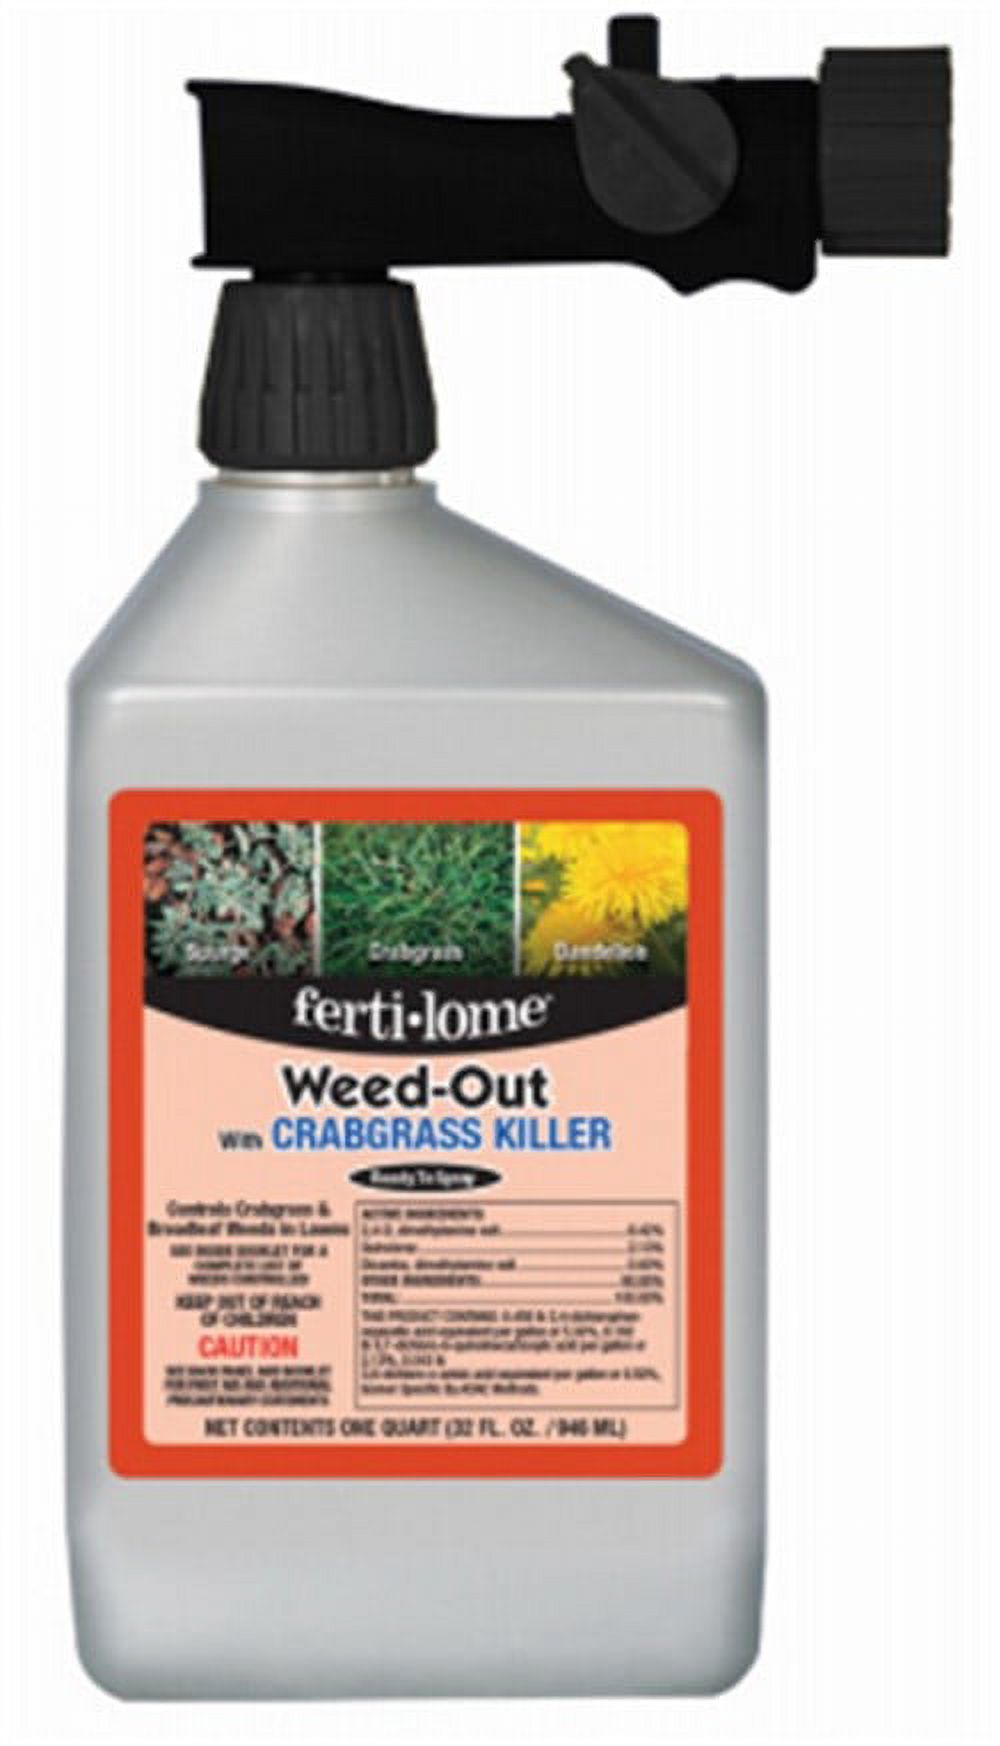 Fertilome Weed-Out with Crabgrass Killer RTS Weed and Crabgrass Killer RTU Liquid 32 oz - image 2 of 5